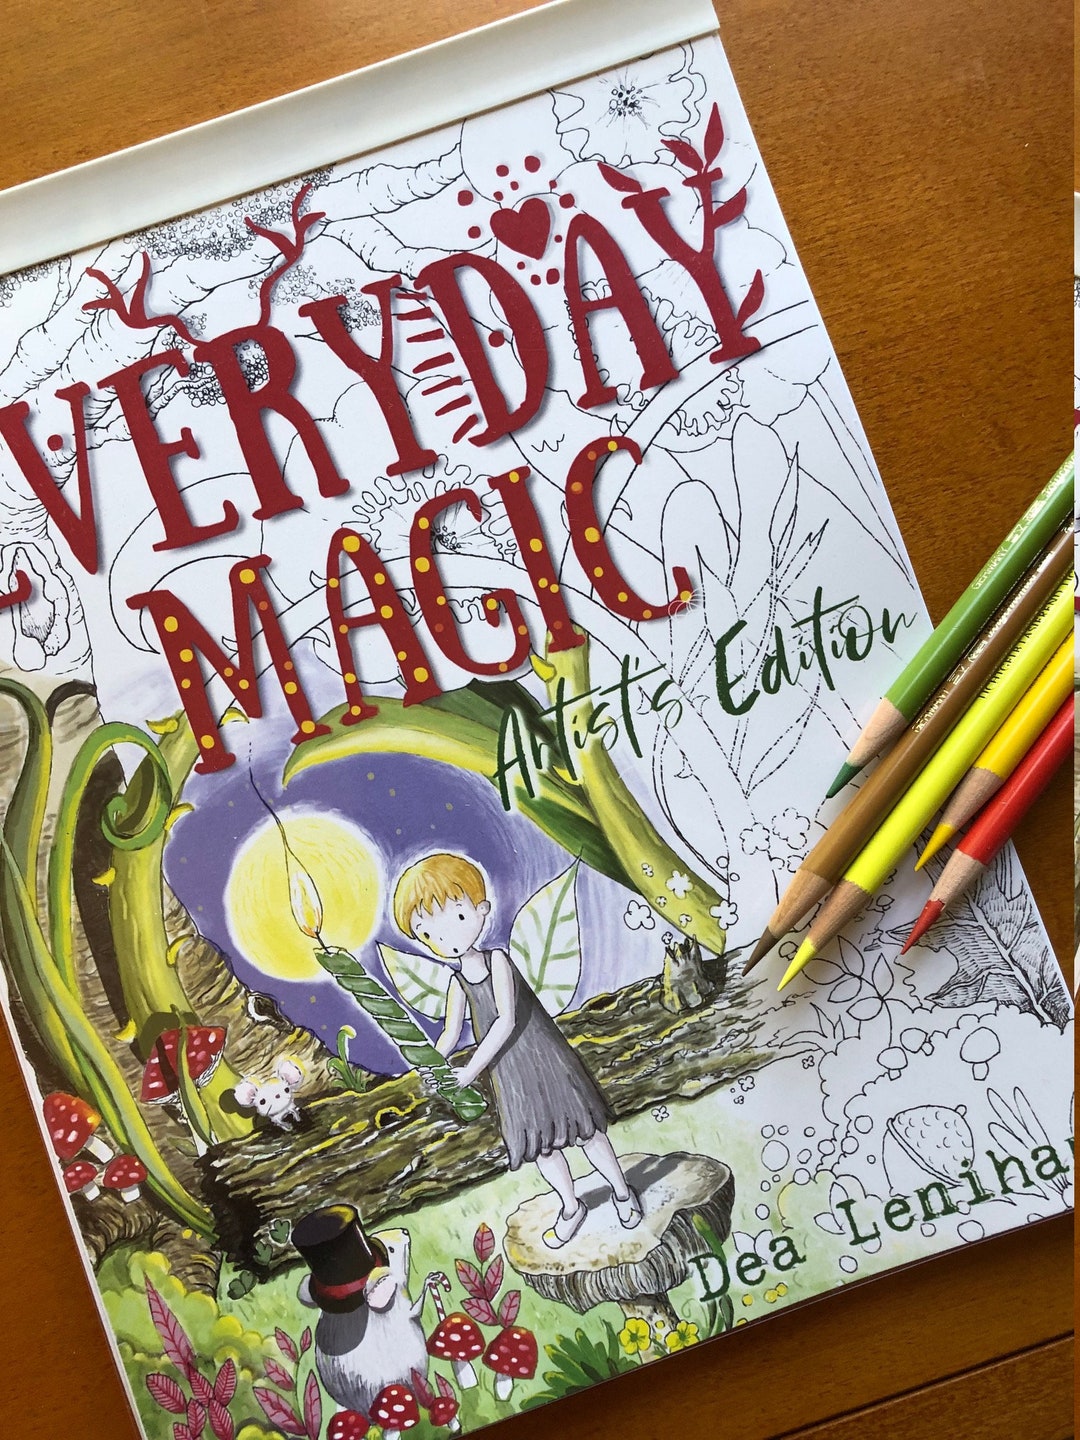 Magic Makers Coloring Book by Tricks, 8.5 x 11 Inches